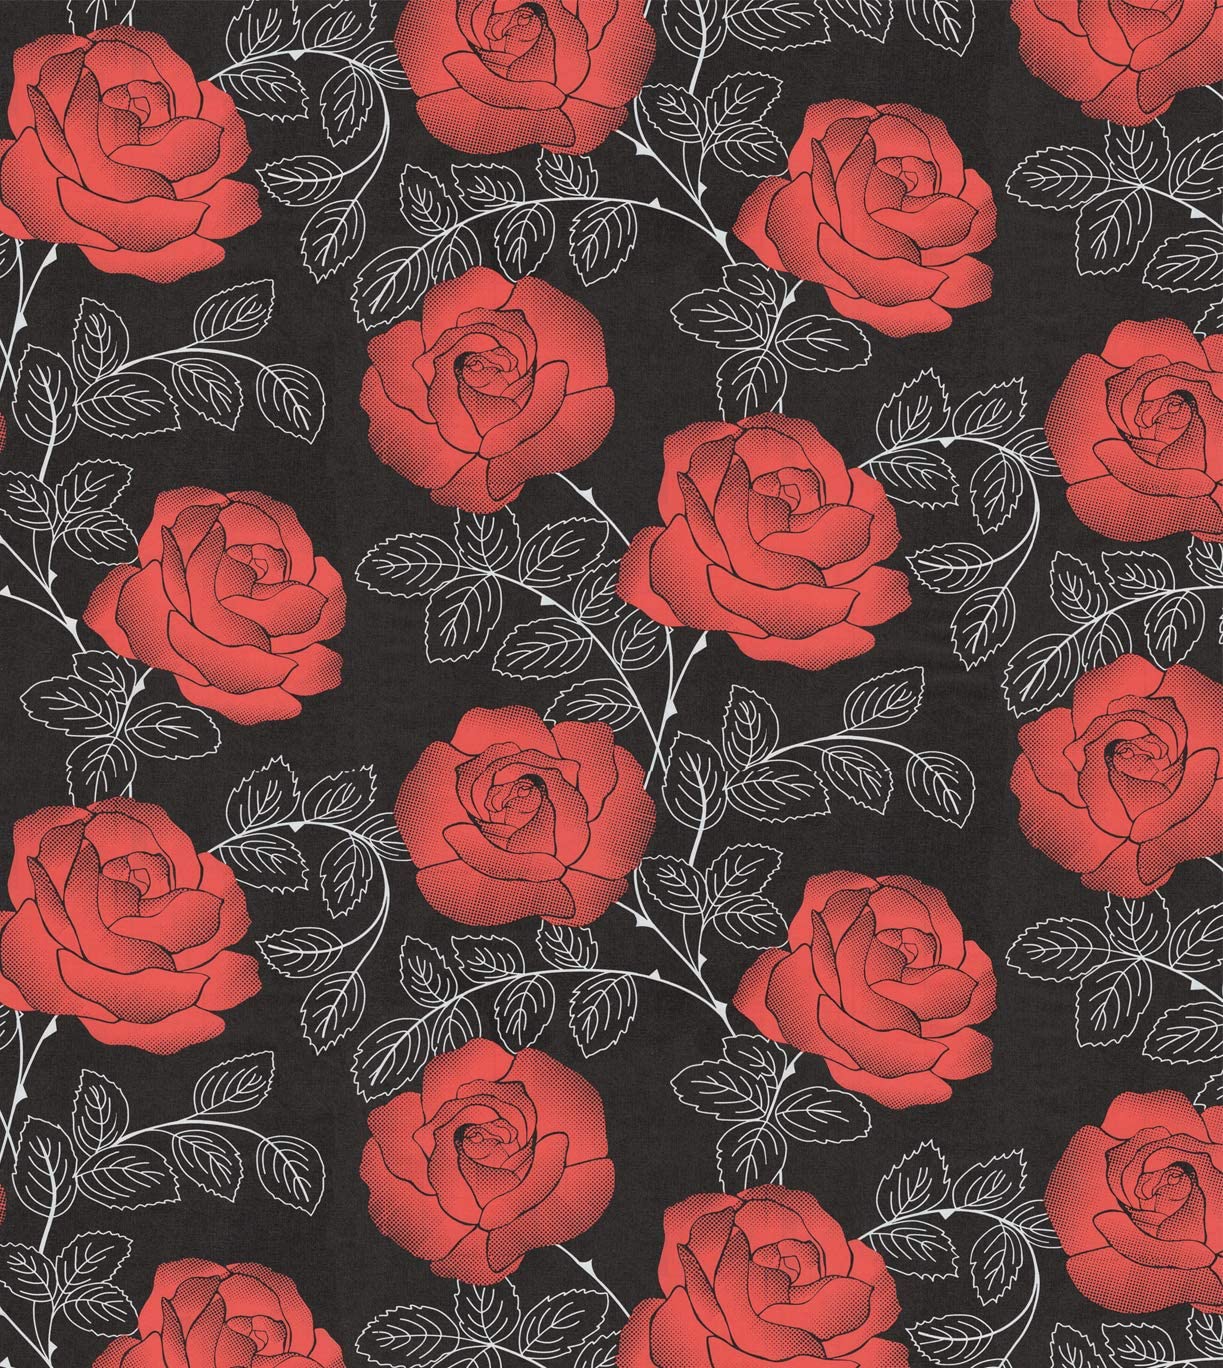 Birwall Peel and Stick Black Red Roses with White Leaves Wallpaper  Prepasted Wal | eBay